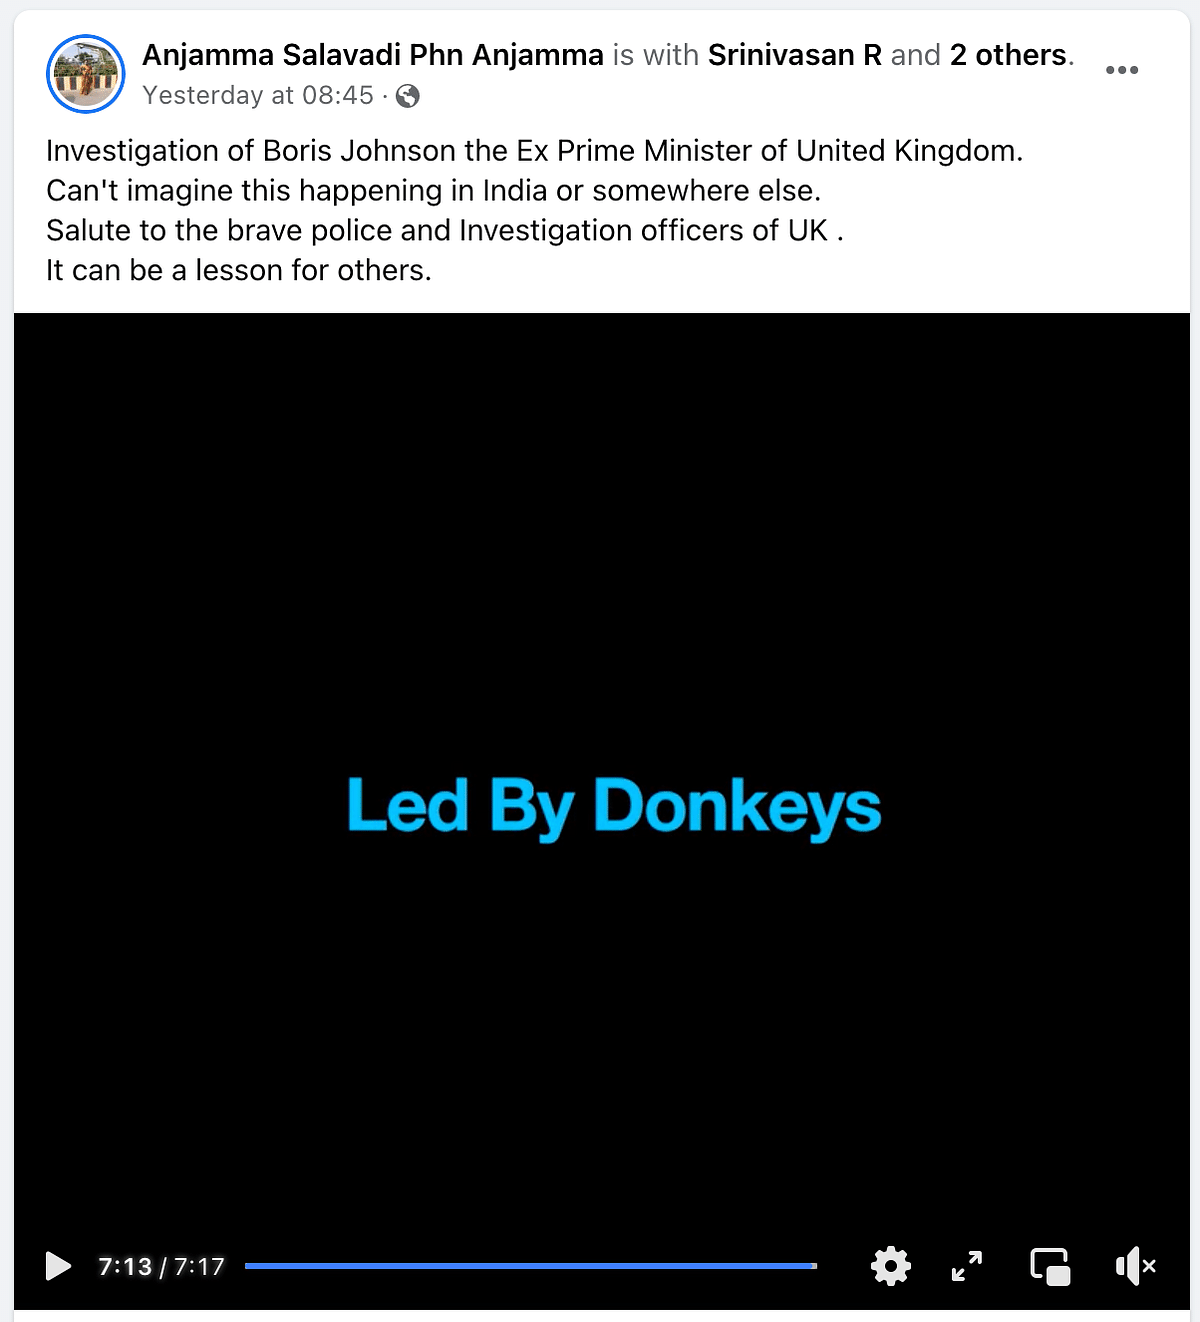 The satirical video was posted by political campaign group 'Led by Donkeys'. 